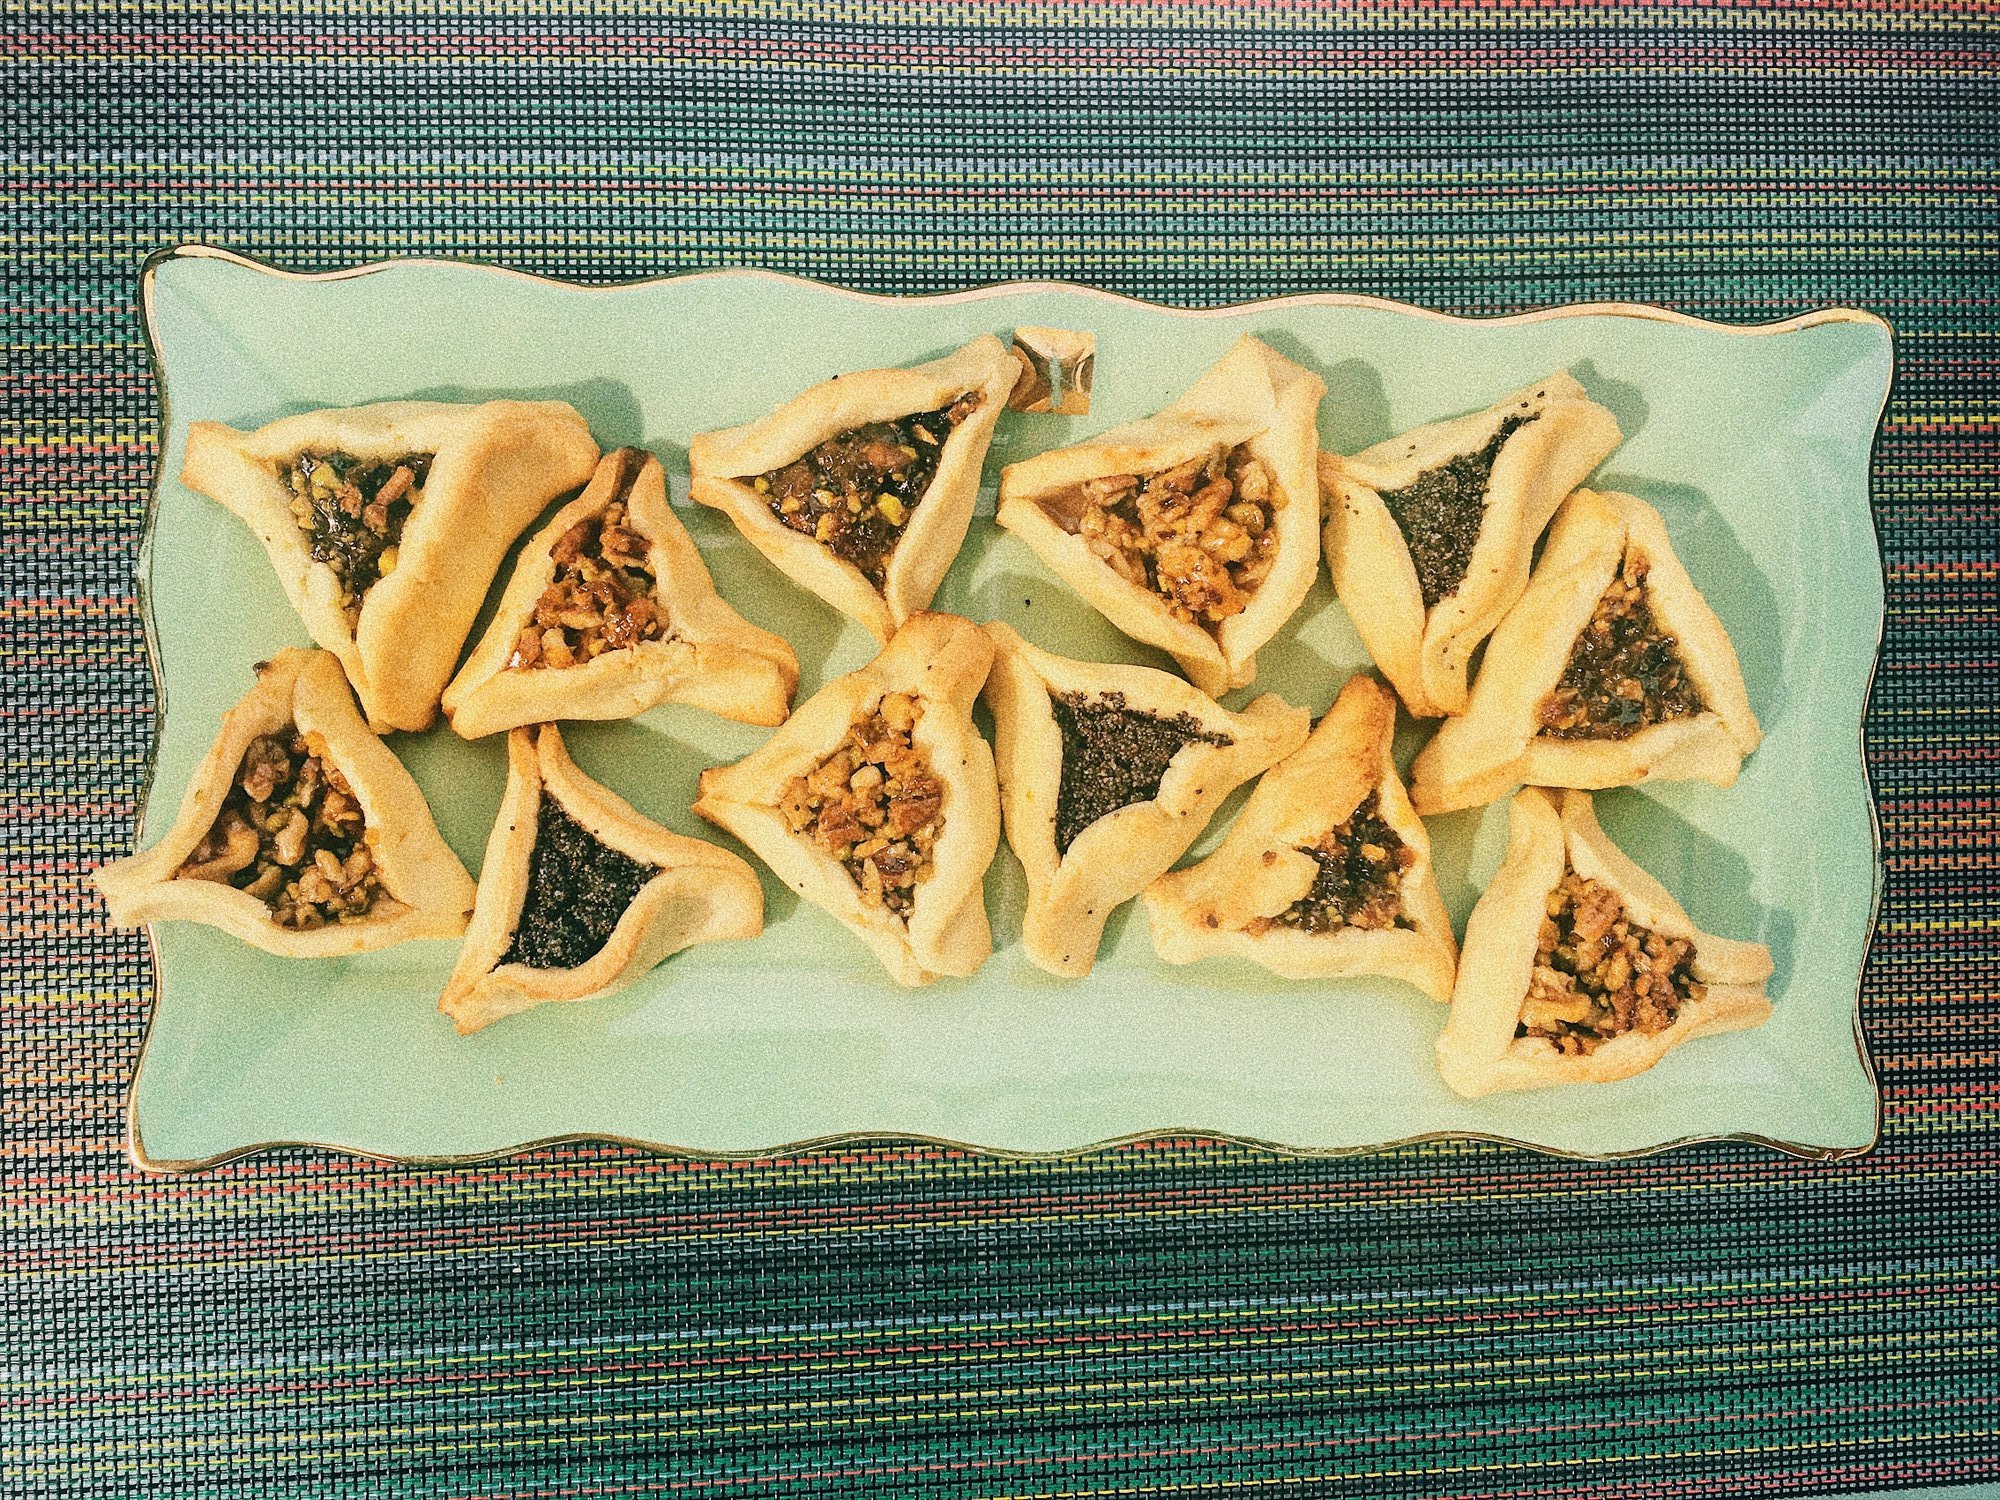 Hamantaschen with Three Fillings.